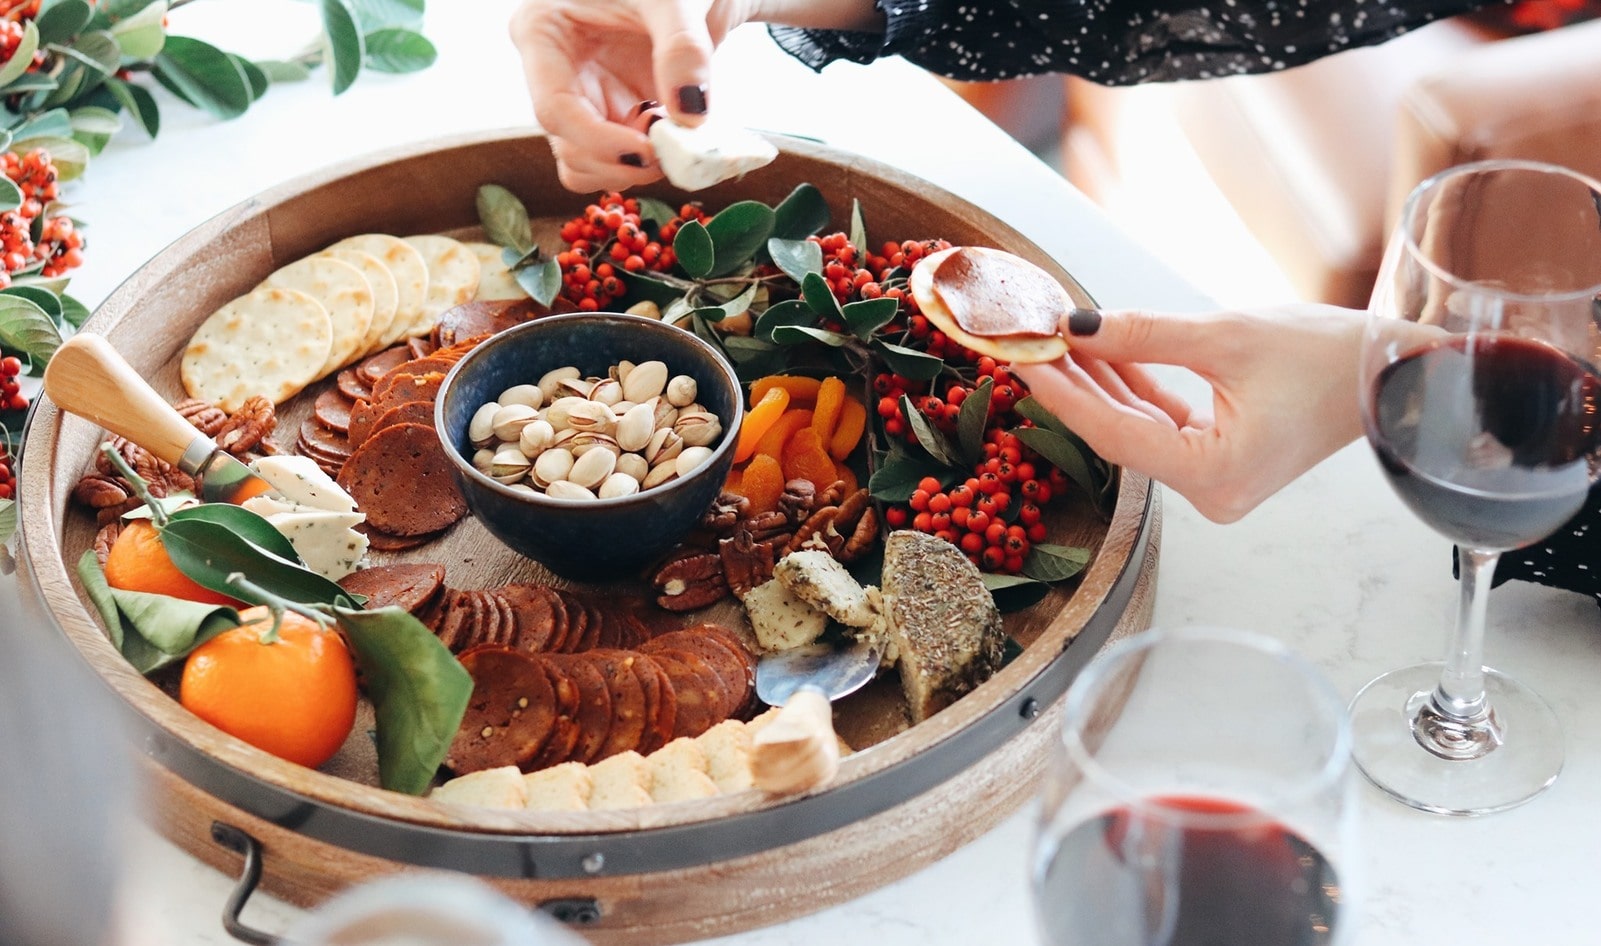 Here's What You Need for the Ultimate Vegan Charcuterie Board